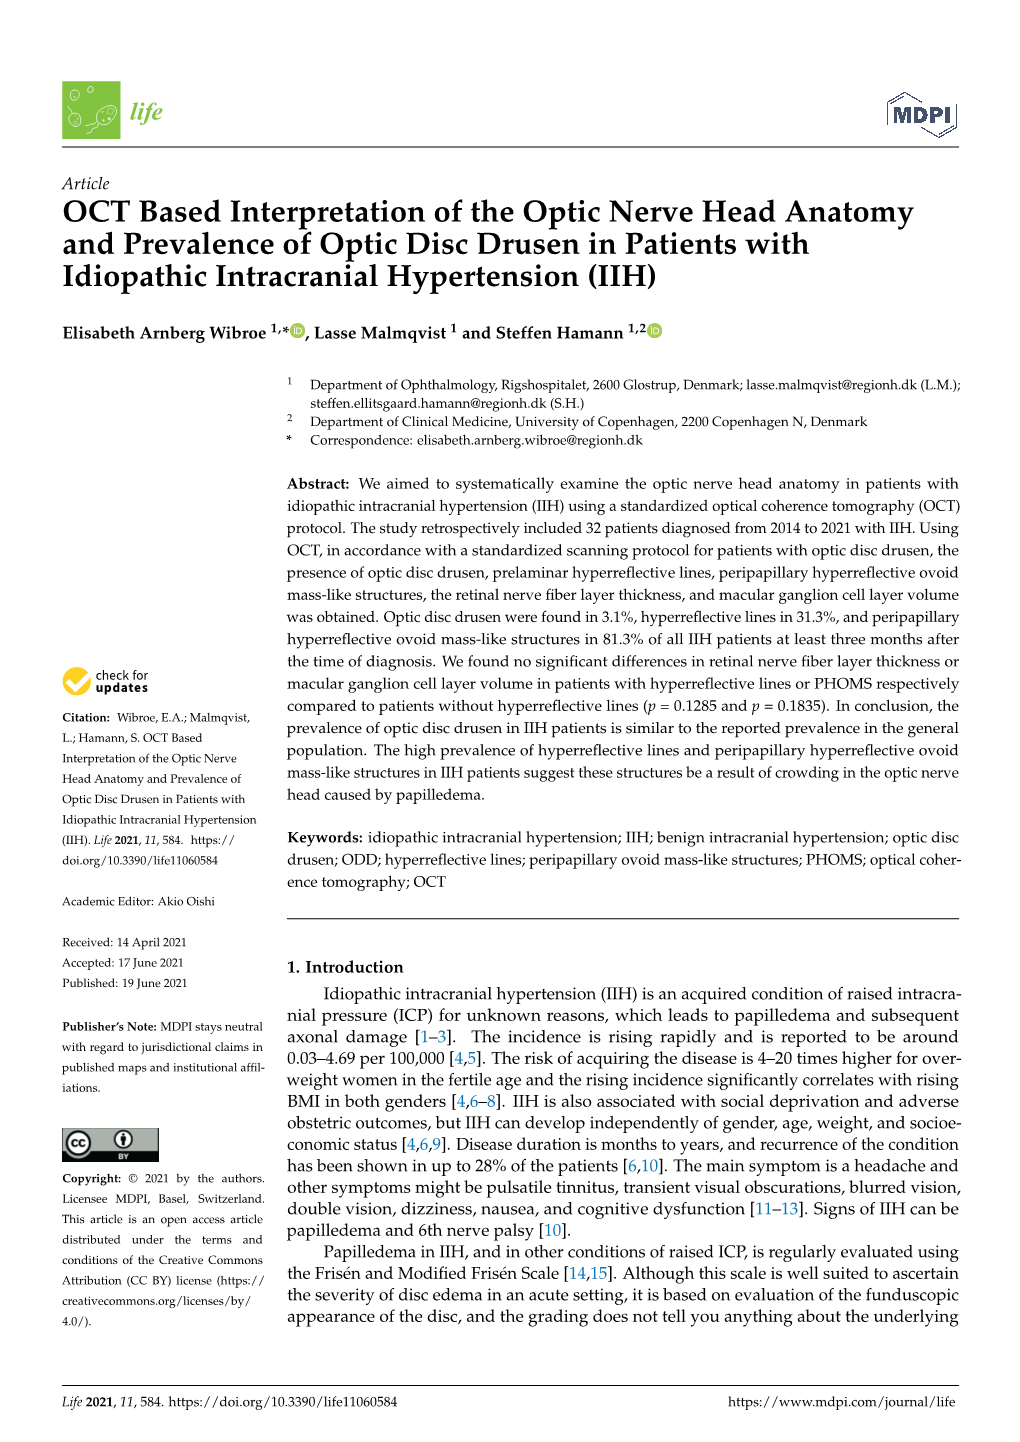 OCT Based Interpretation of the Optic Nerve Head Anatomy and Prevalence of Optic Disc Drusen in Patients with Idiopathic Intracranial Hypertension (IIH)